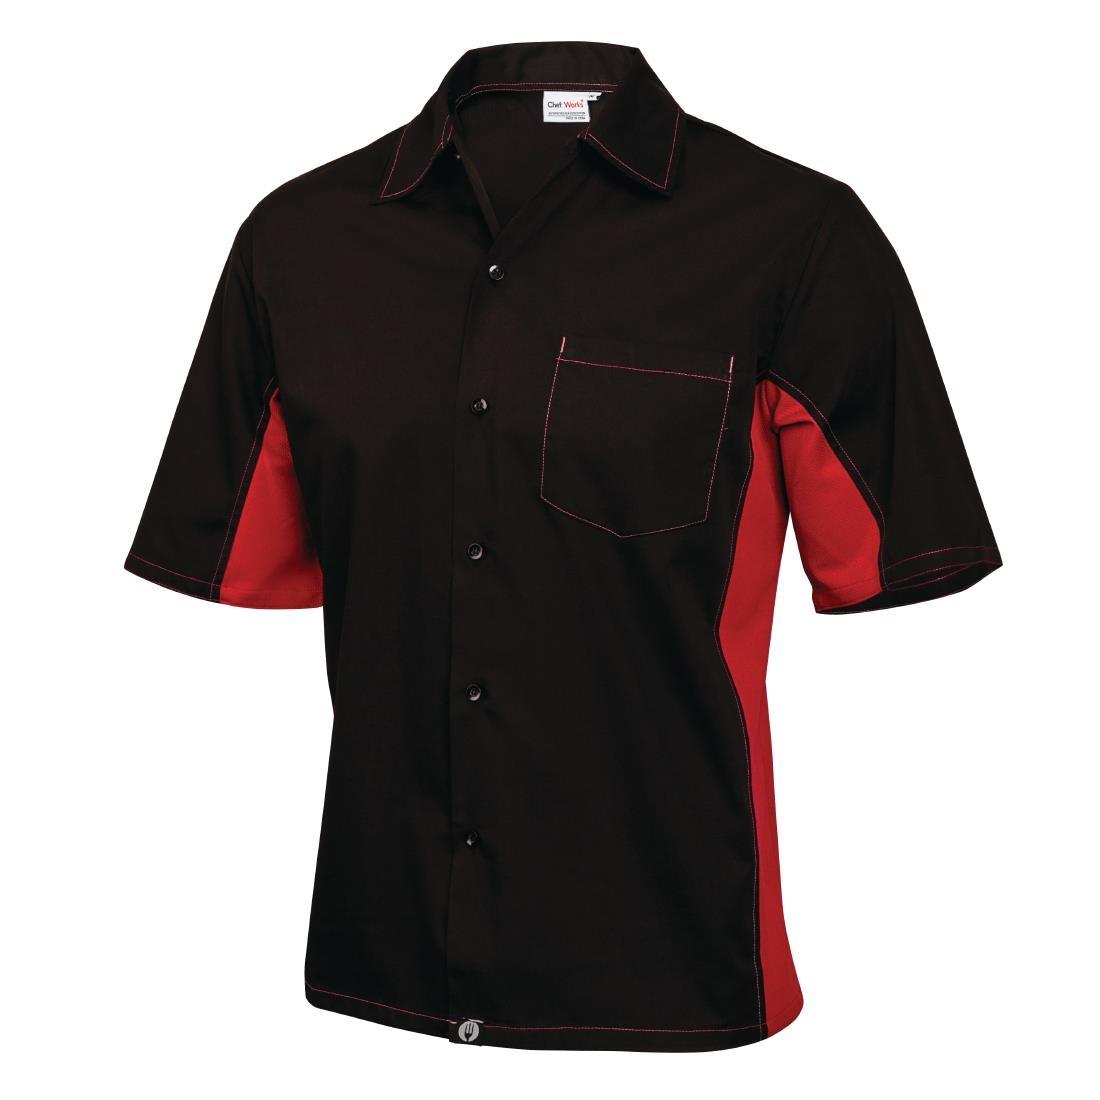 Chef Works Unisex Contrast Shirt Black and Red XL - A952-XL  - 2